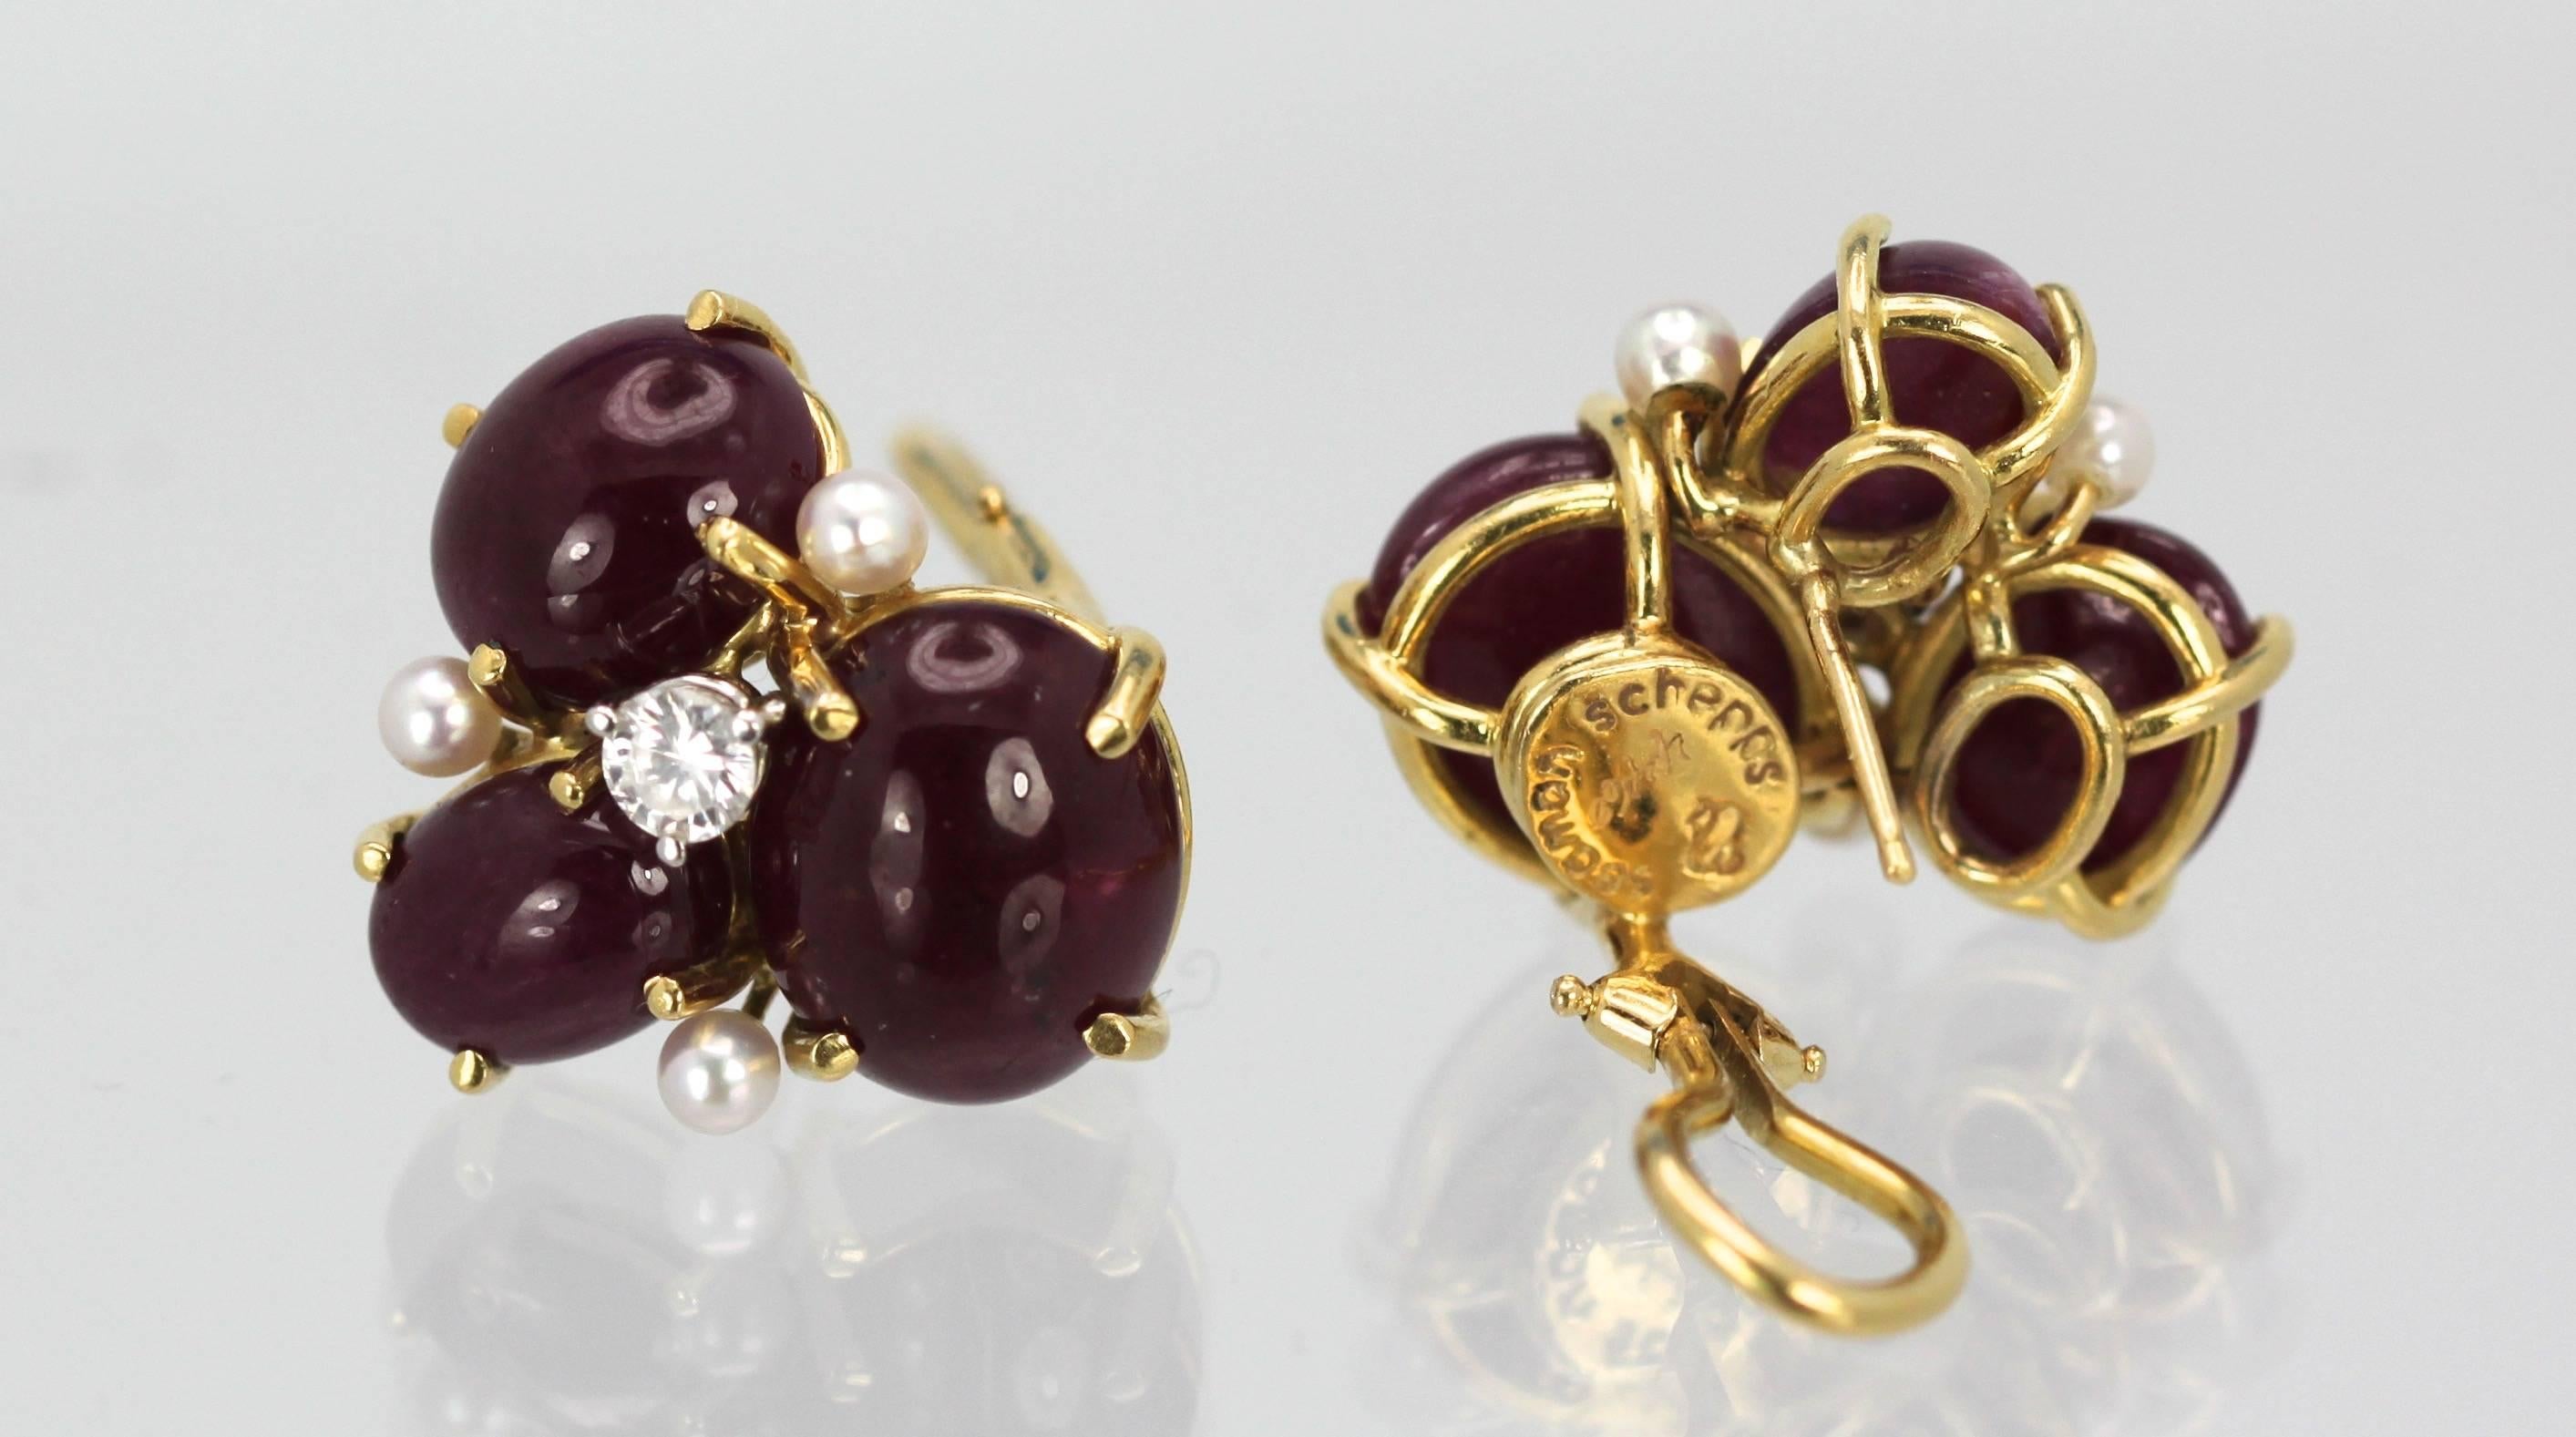 Retro Seaman Schepps Ruby Cabochon Earrings with Three Pearls and Diamonds Pierced 18K